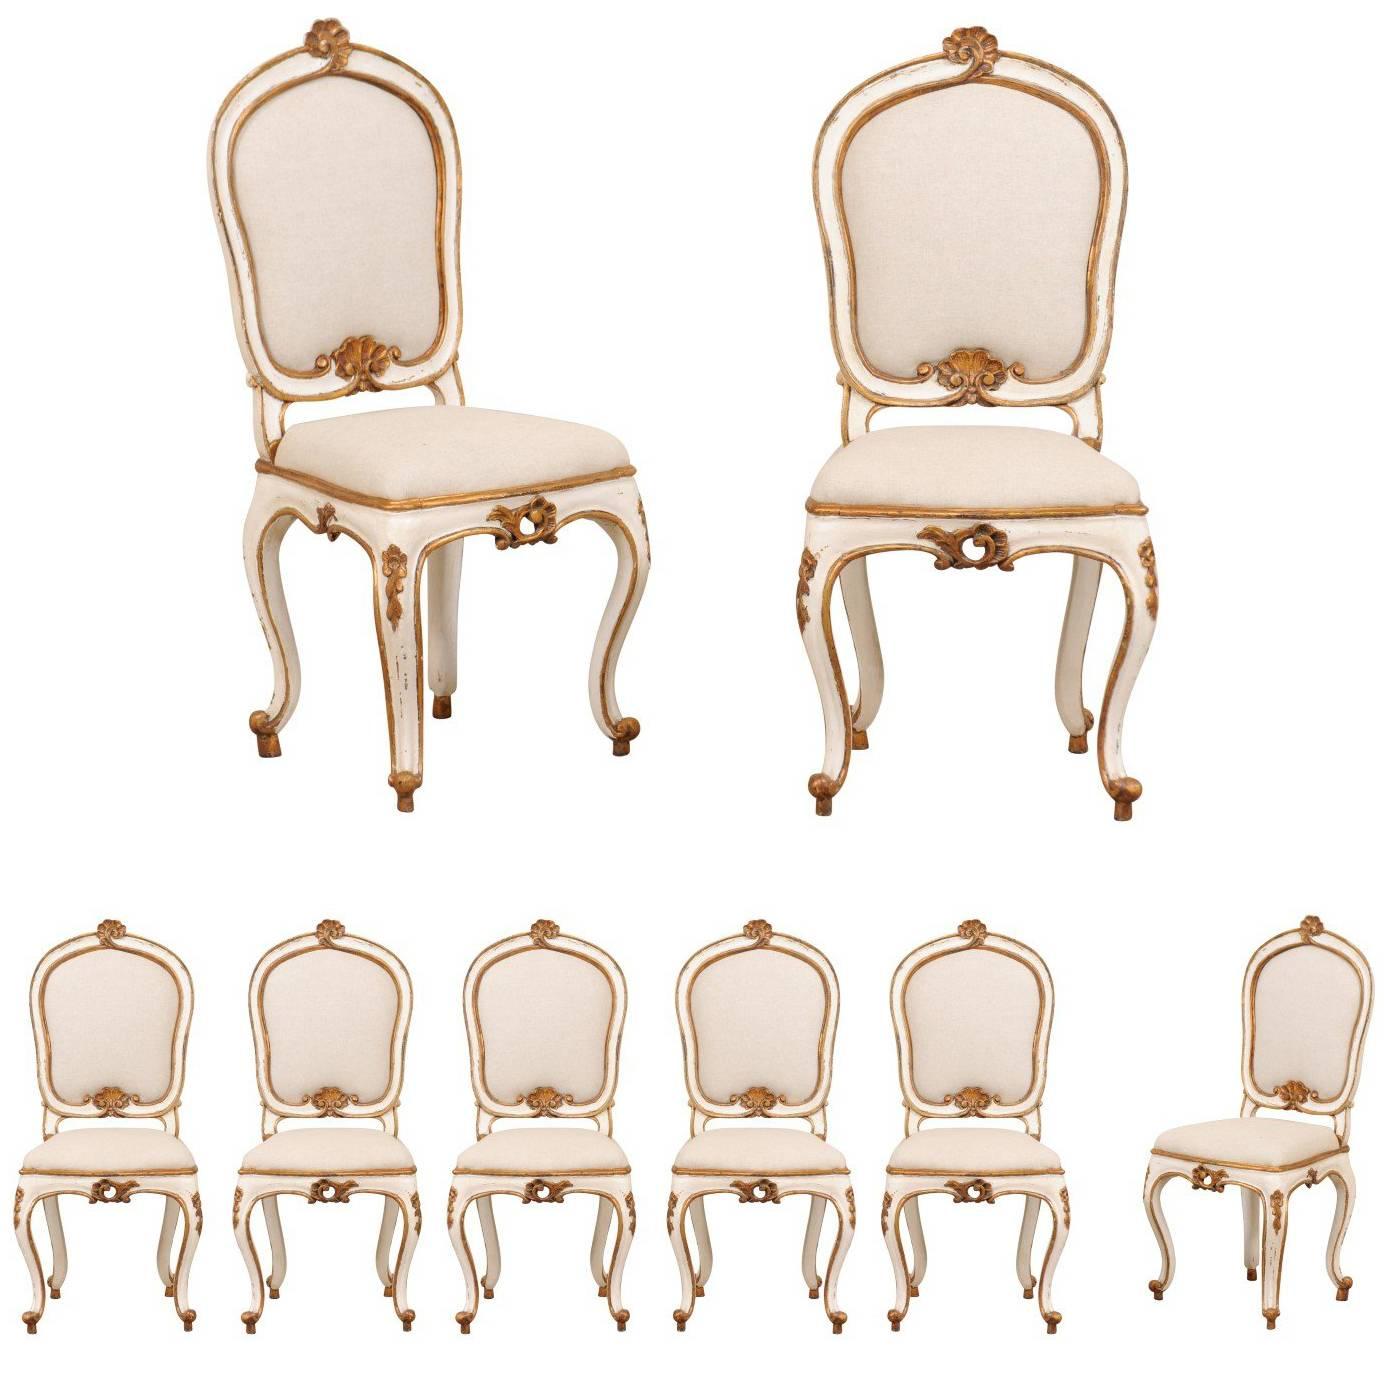 Set of Eight Italian Carved Wood Side Chairs with Stunning Deep Gold Trim